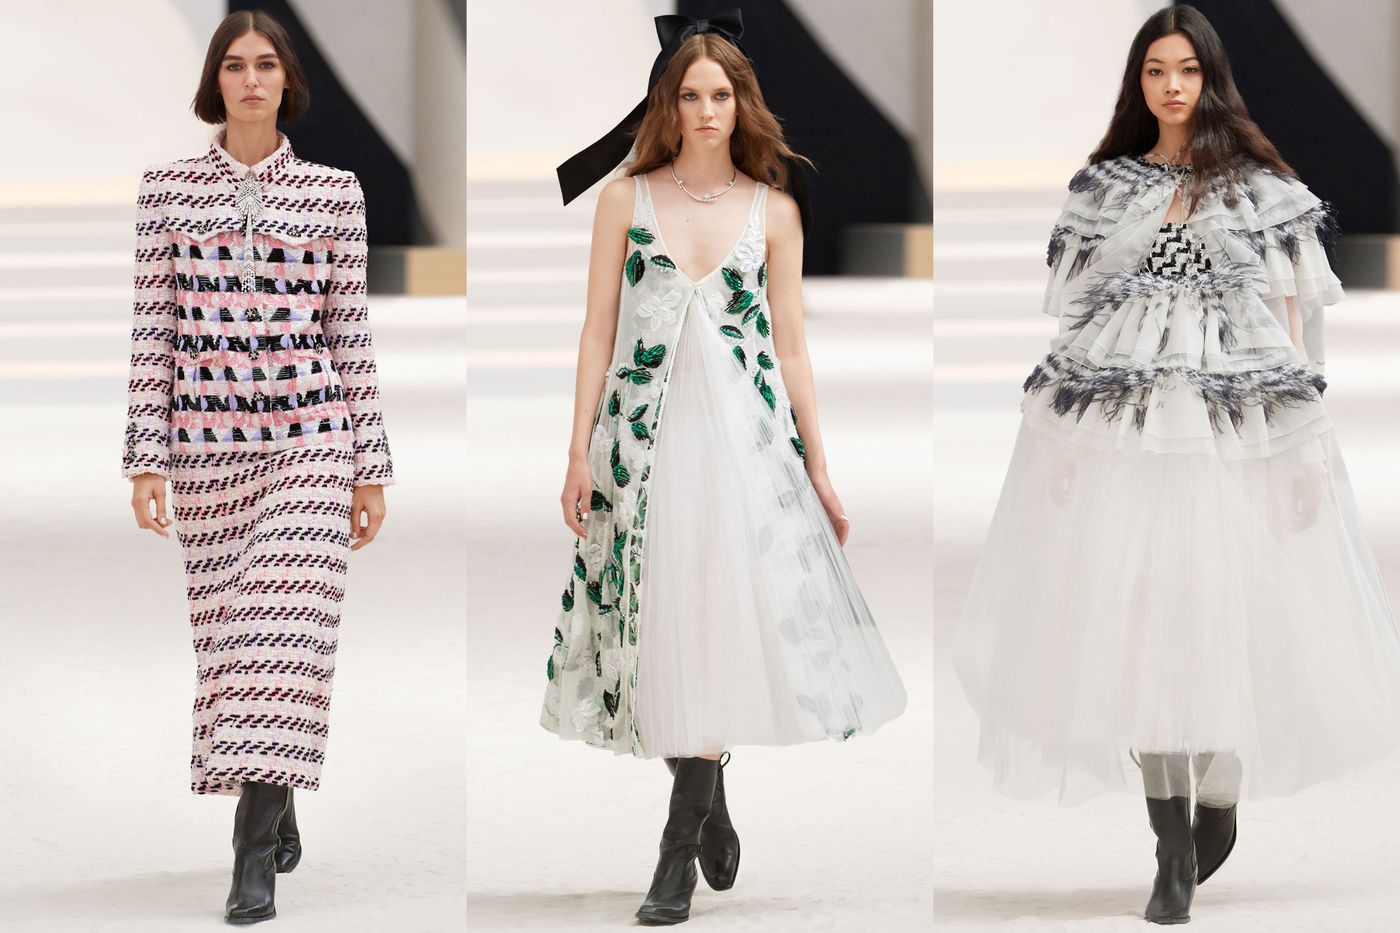 Chanel News, Collections, Fashion Shows, Fashion Week Reviews, and More